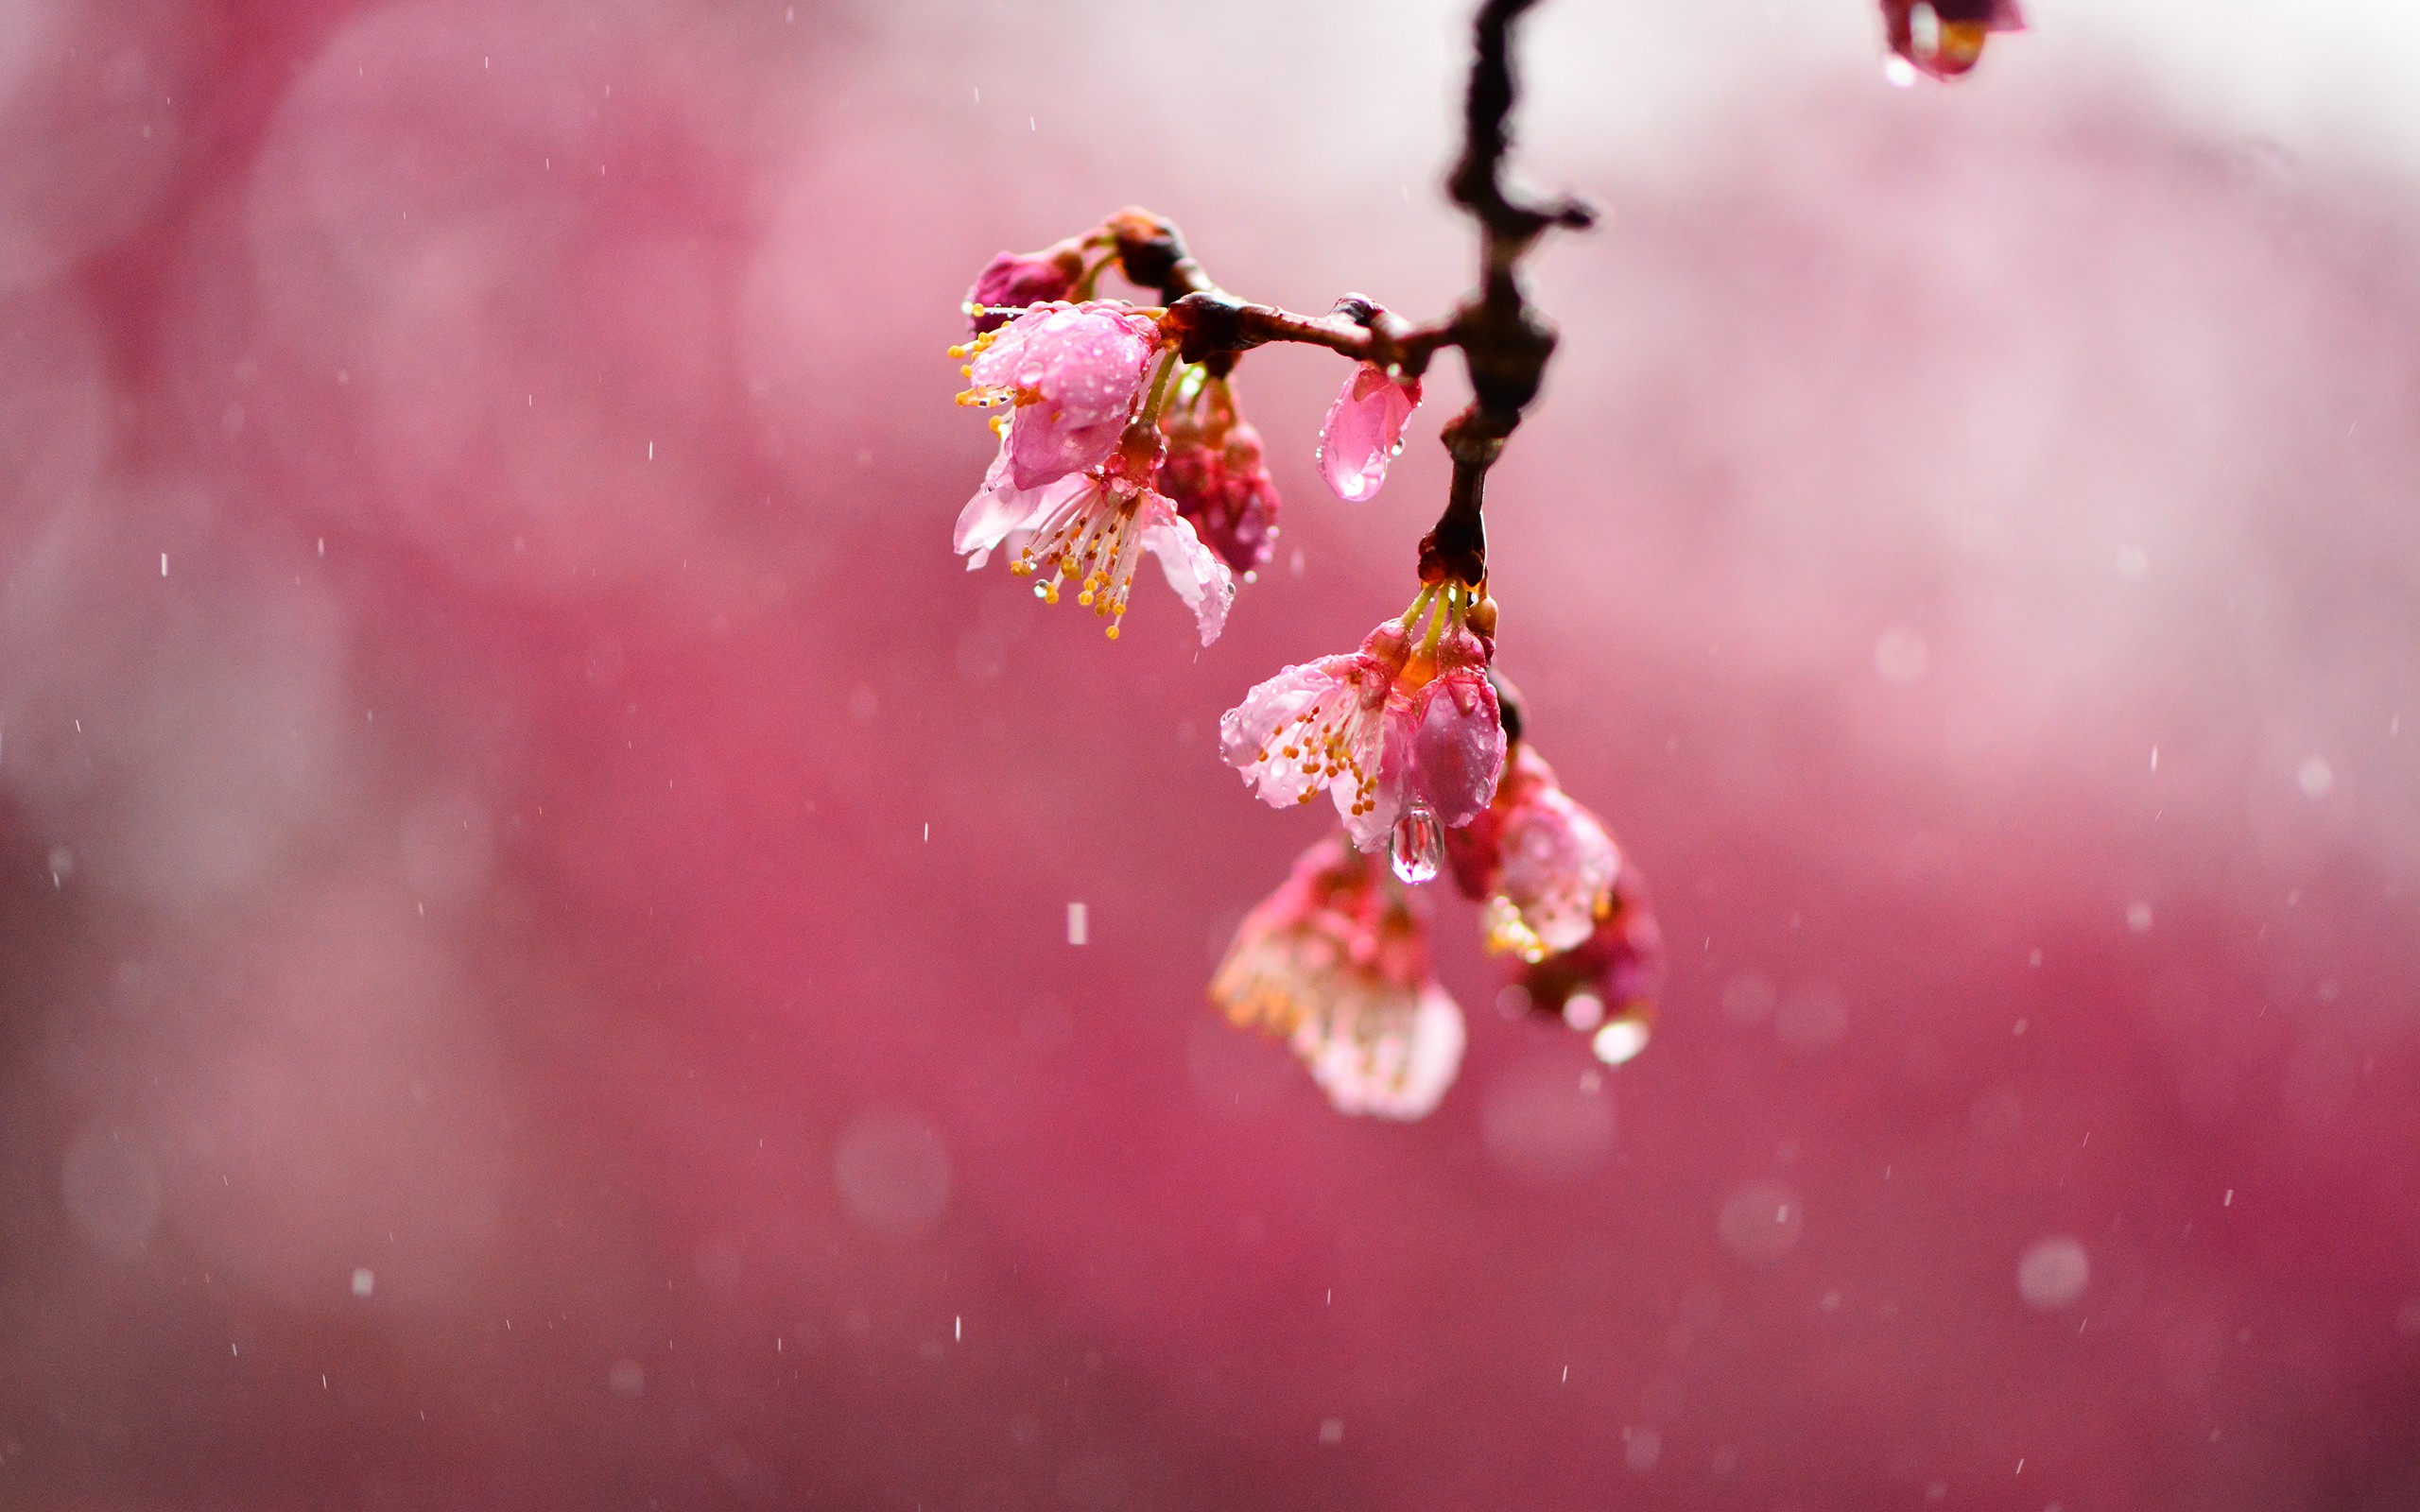 General 2560x1600 nature flowers water drops simple background branch plants cherry blossom rain red flowers red